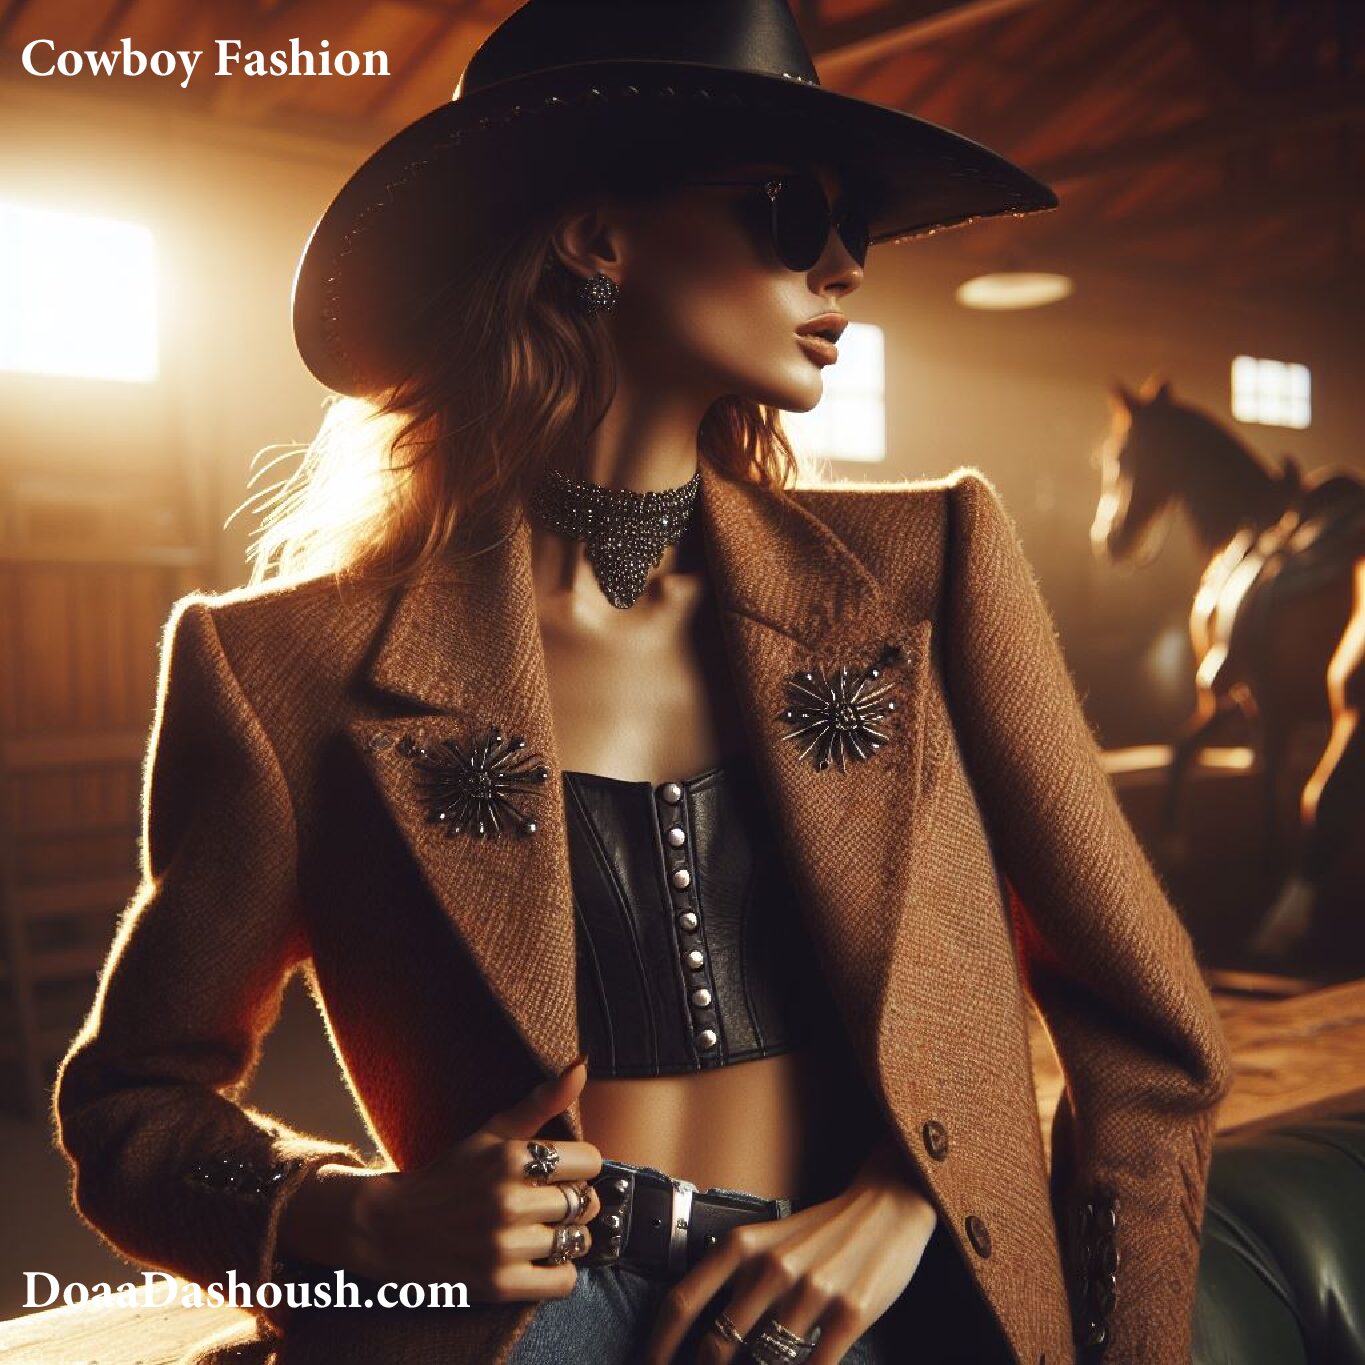 From Ranch to Runway: The Enduring Appeal of Cowboy Fashion